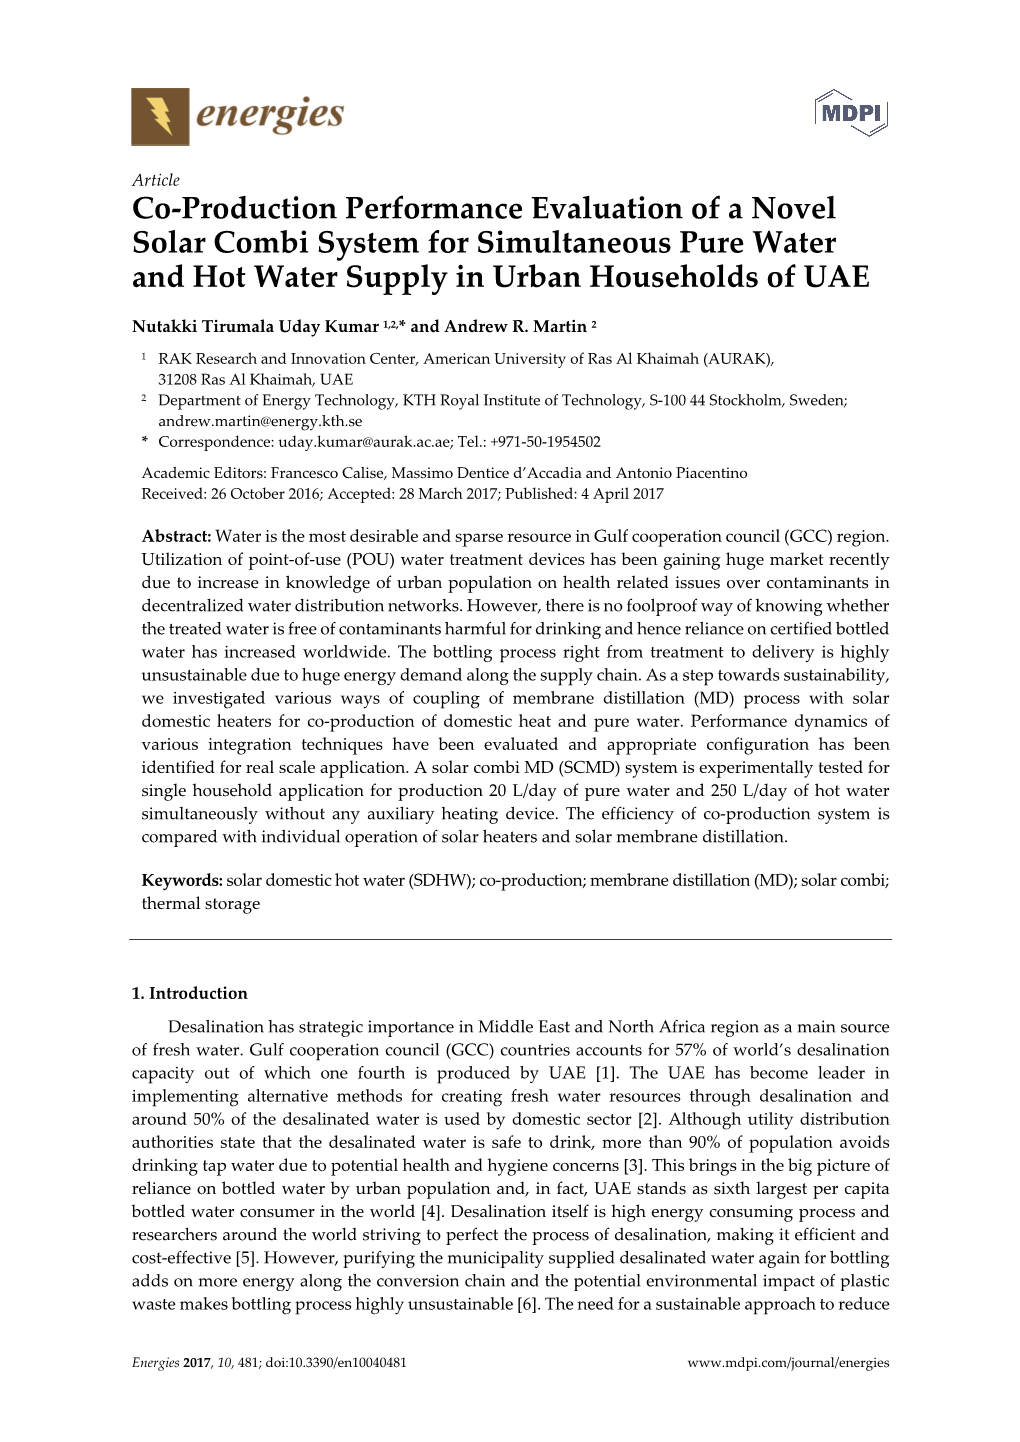 Co-Production Performance Evaluation of a Novel Solar Combi System for Simultaneous Pure Water and Hot Water Supply in Urban Households of UAE